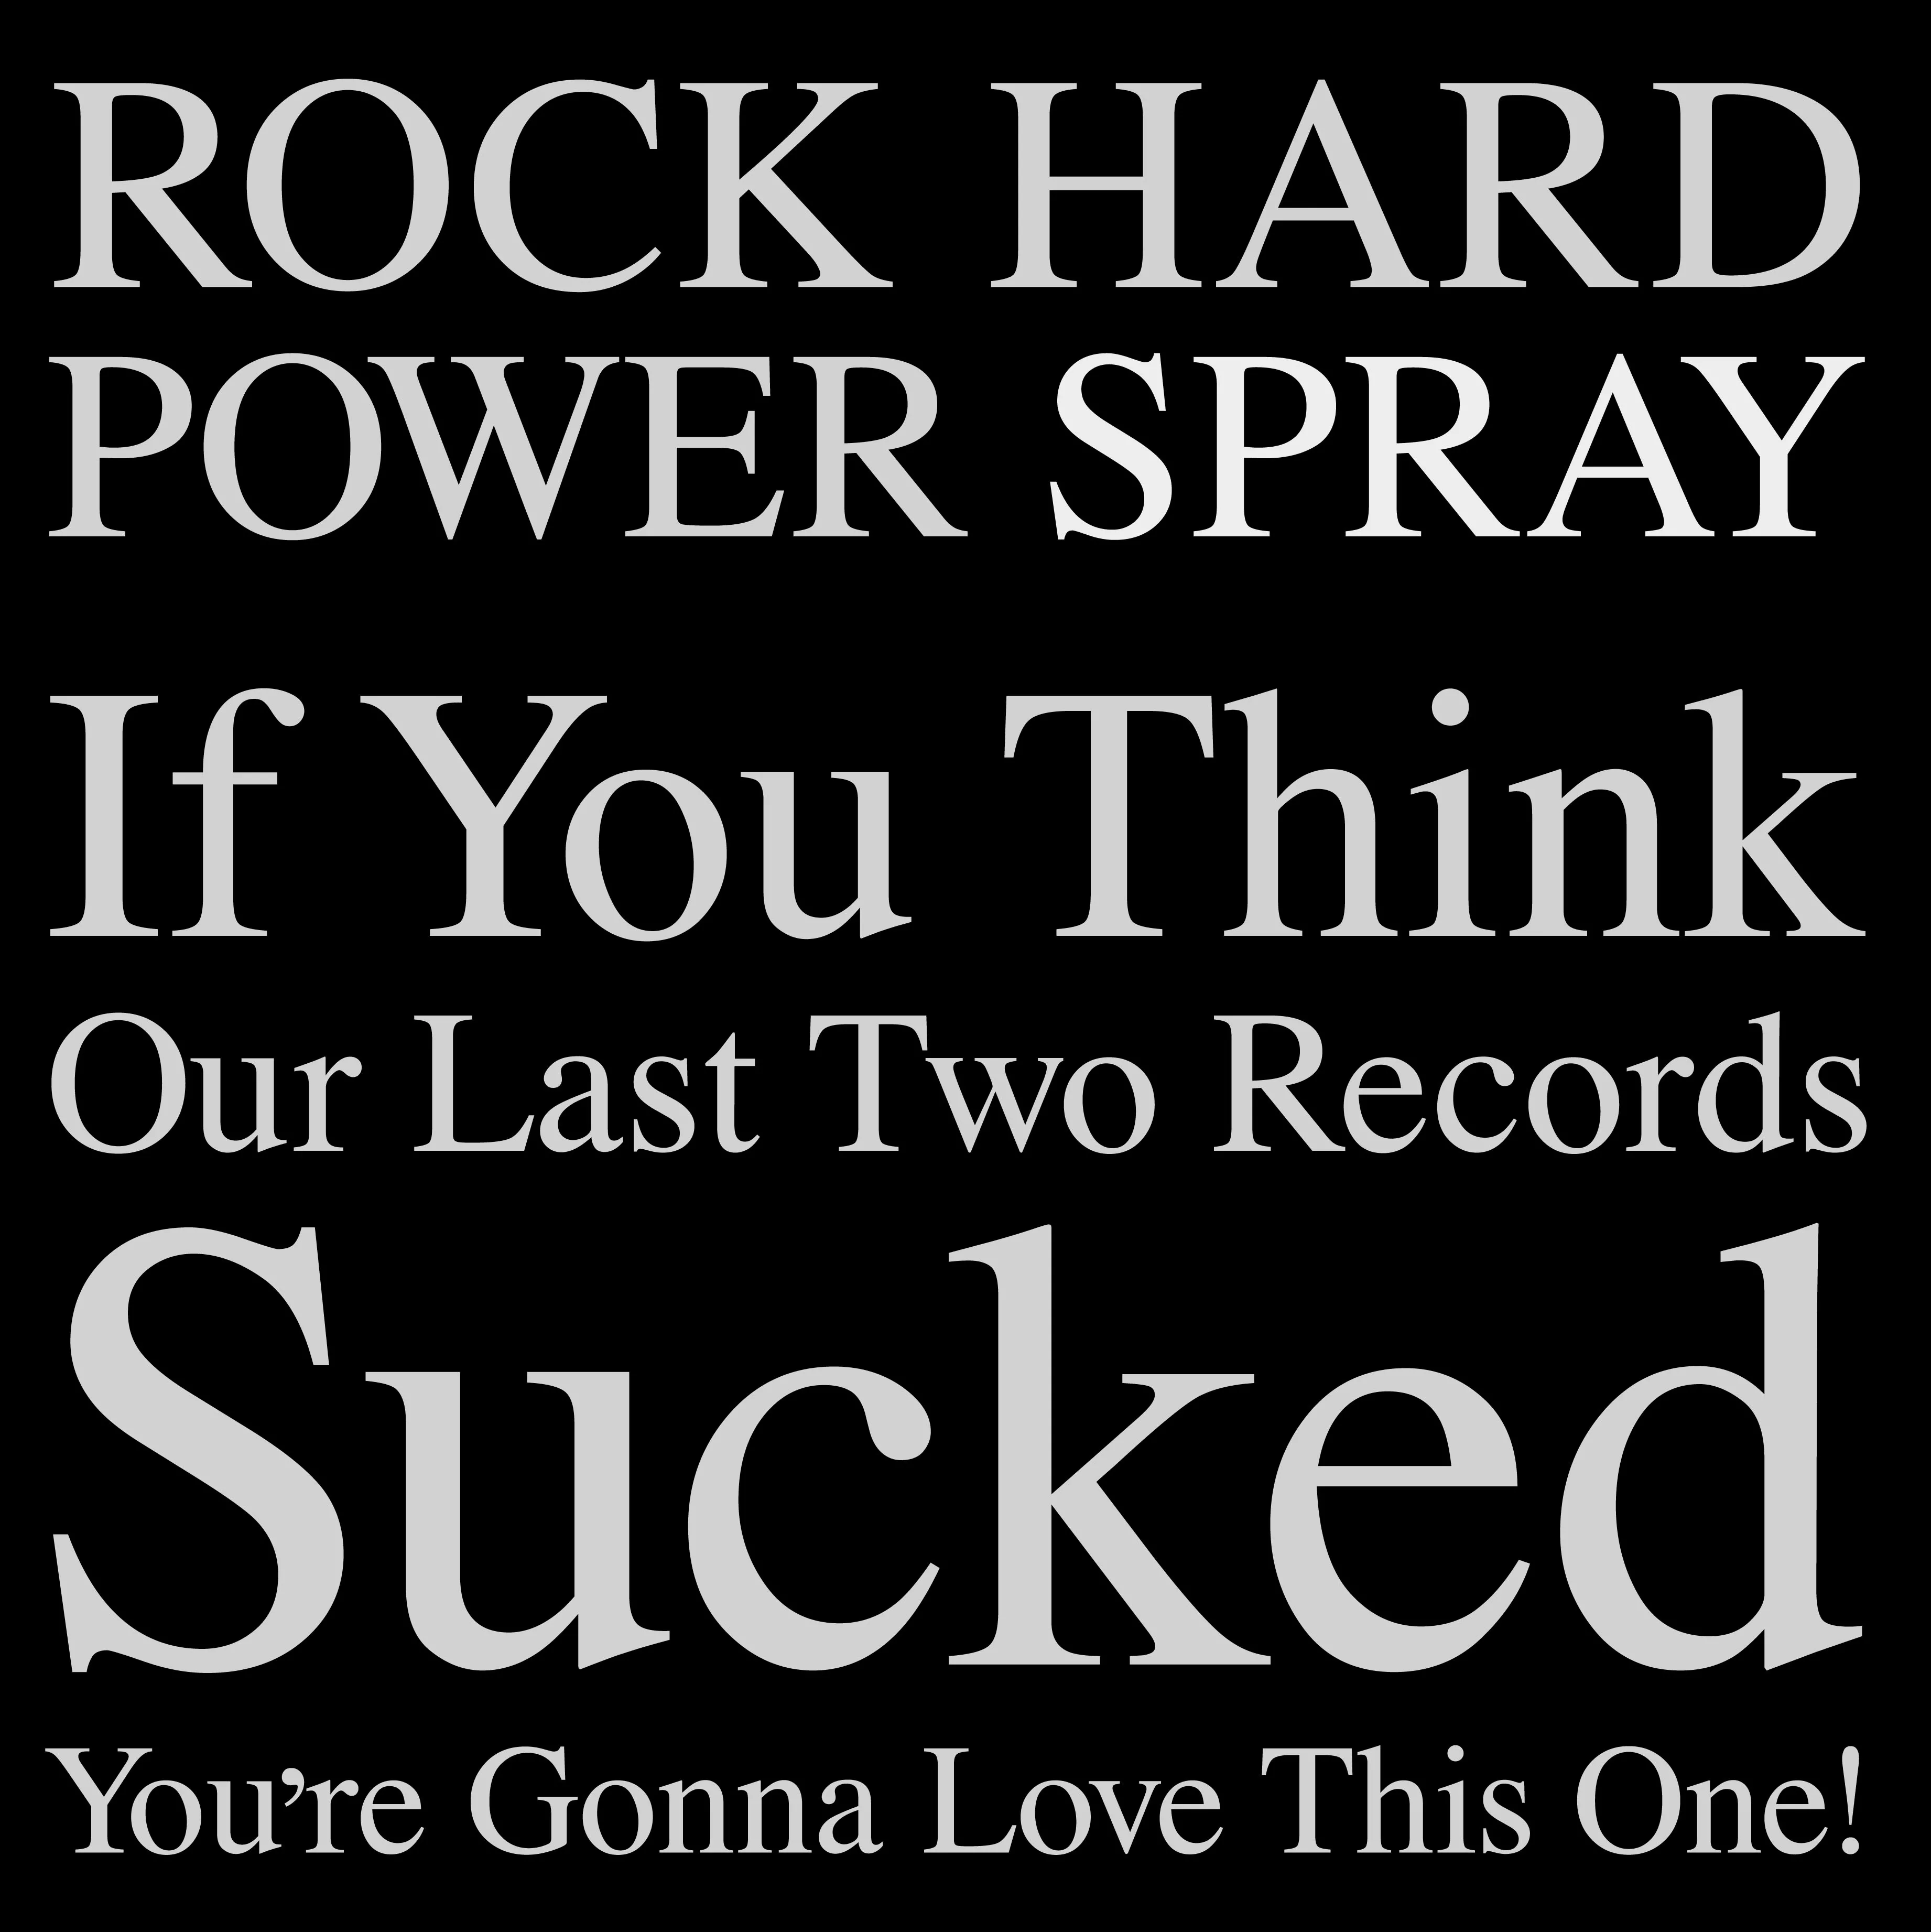 If You Think Our Last Two Records Sucked You're Gonna Love This One - Rock Hard Power Spray